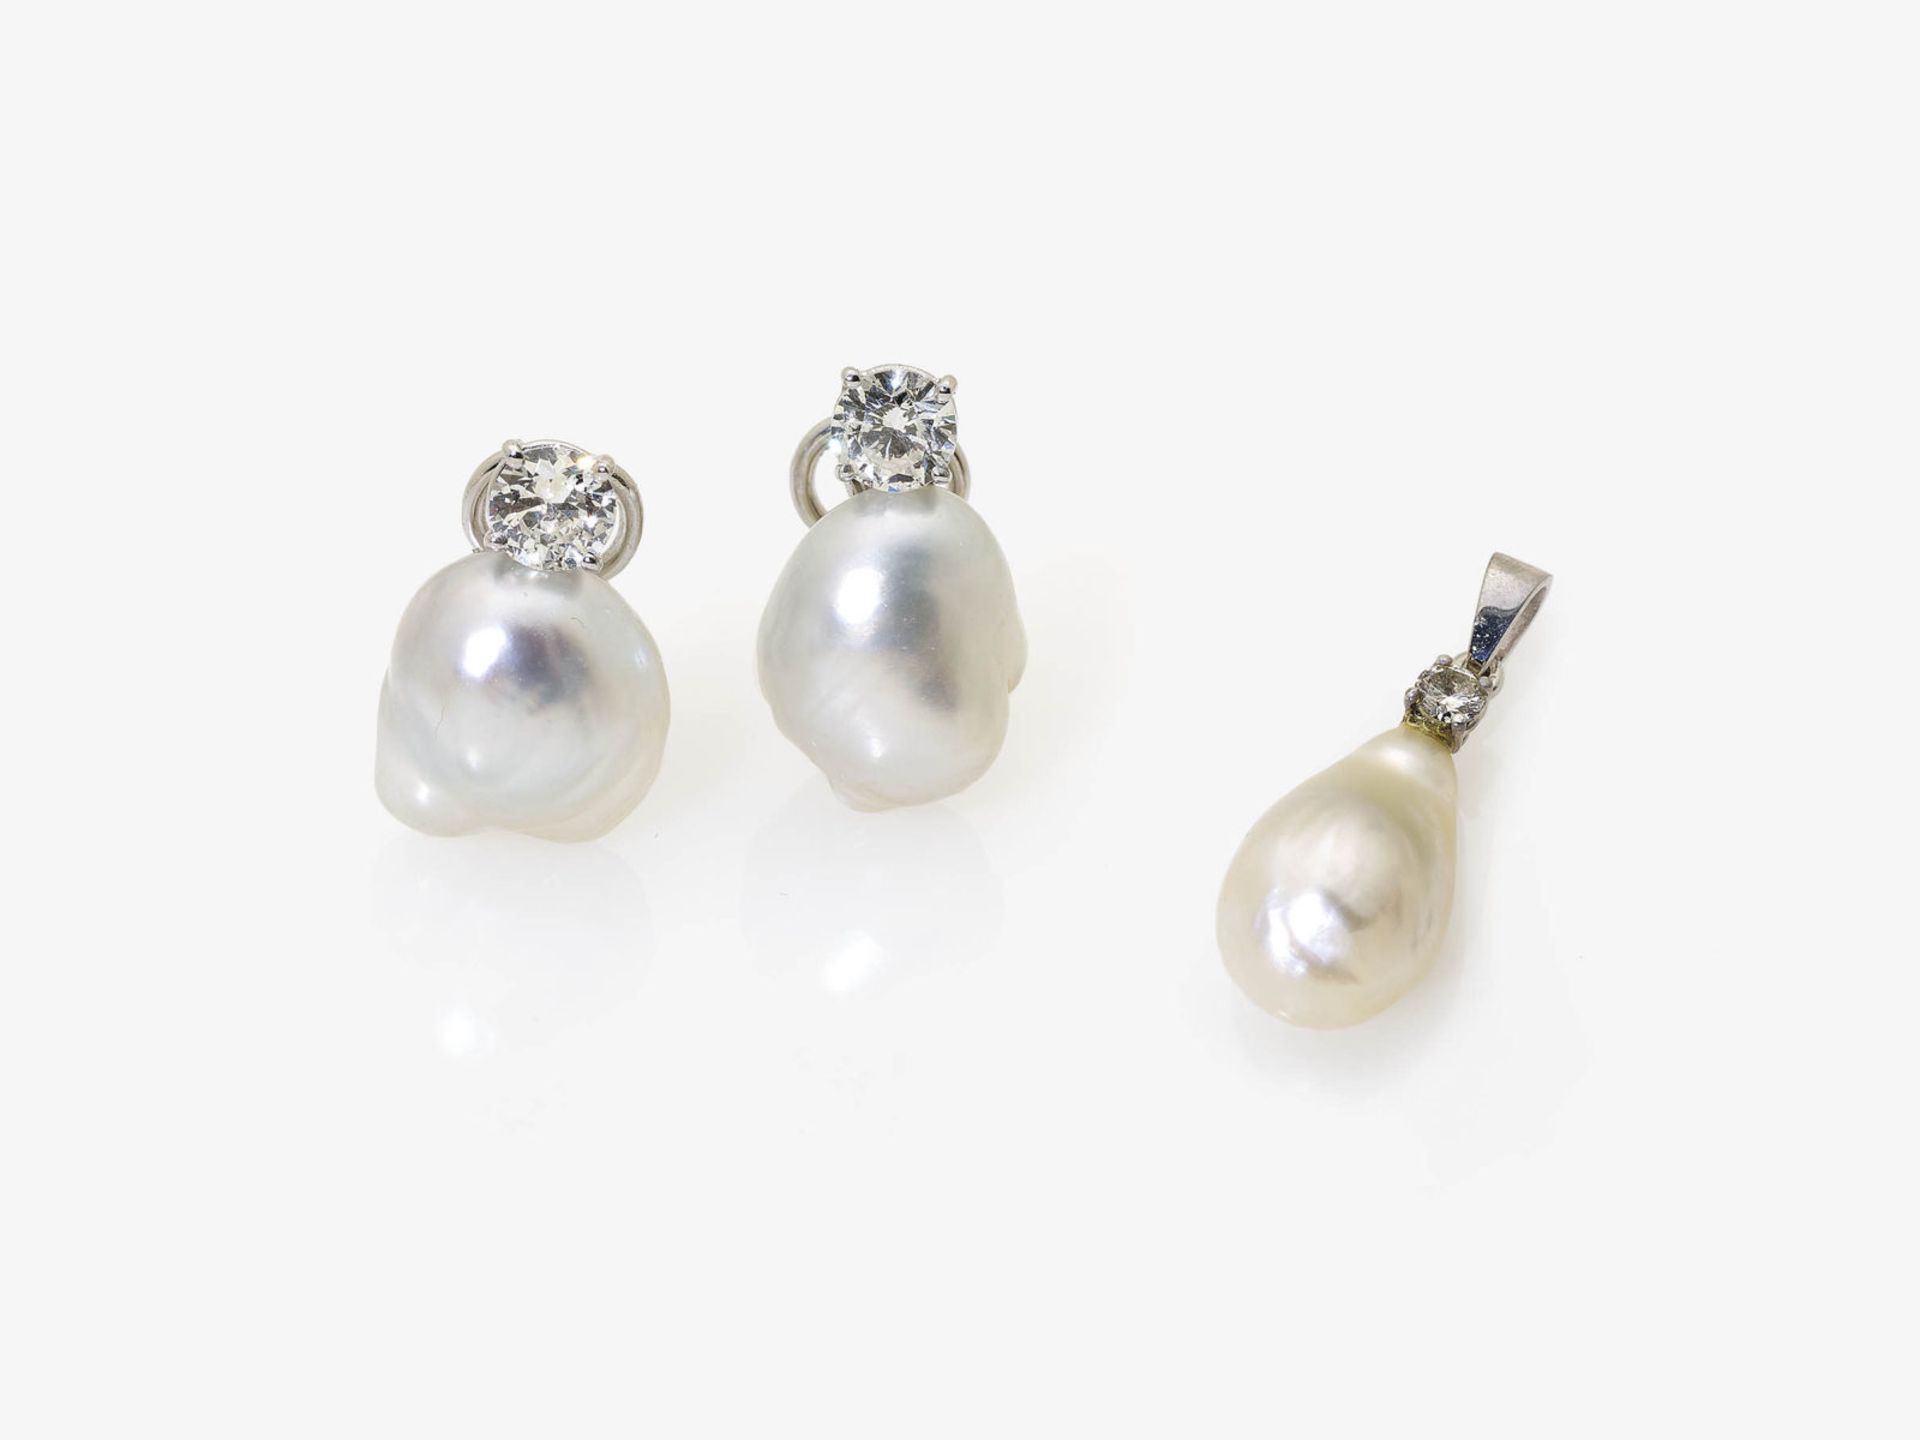 A Pair of Cultured Pearl and Diamond Earrings and a Pendant